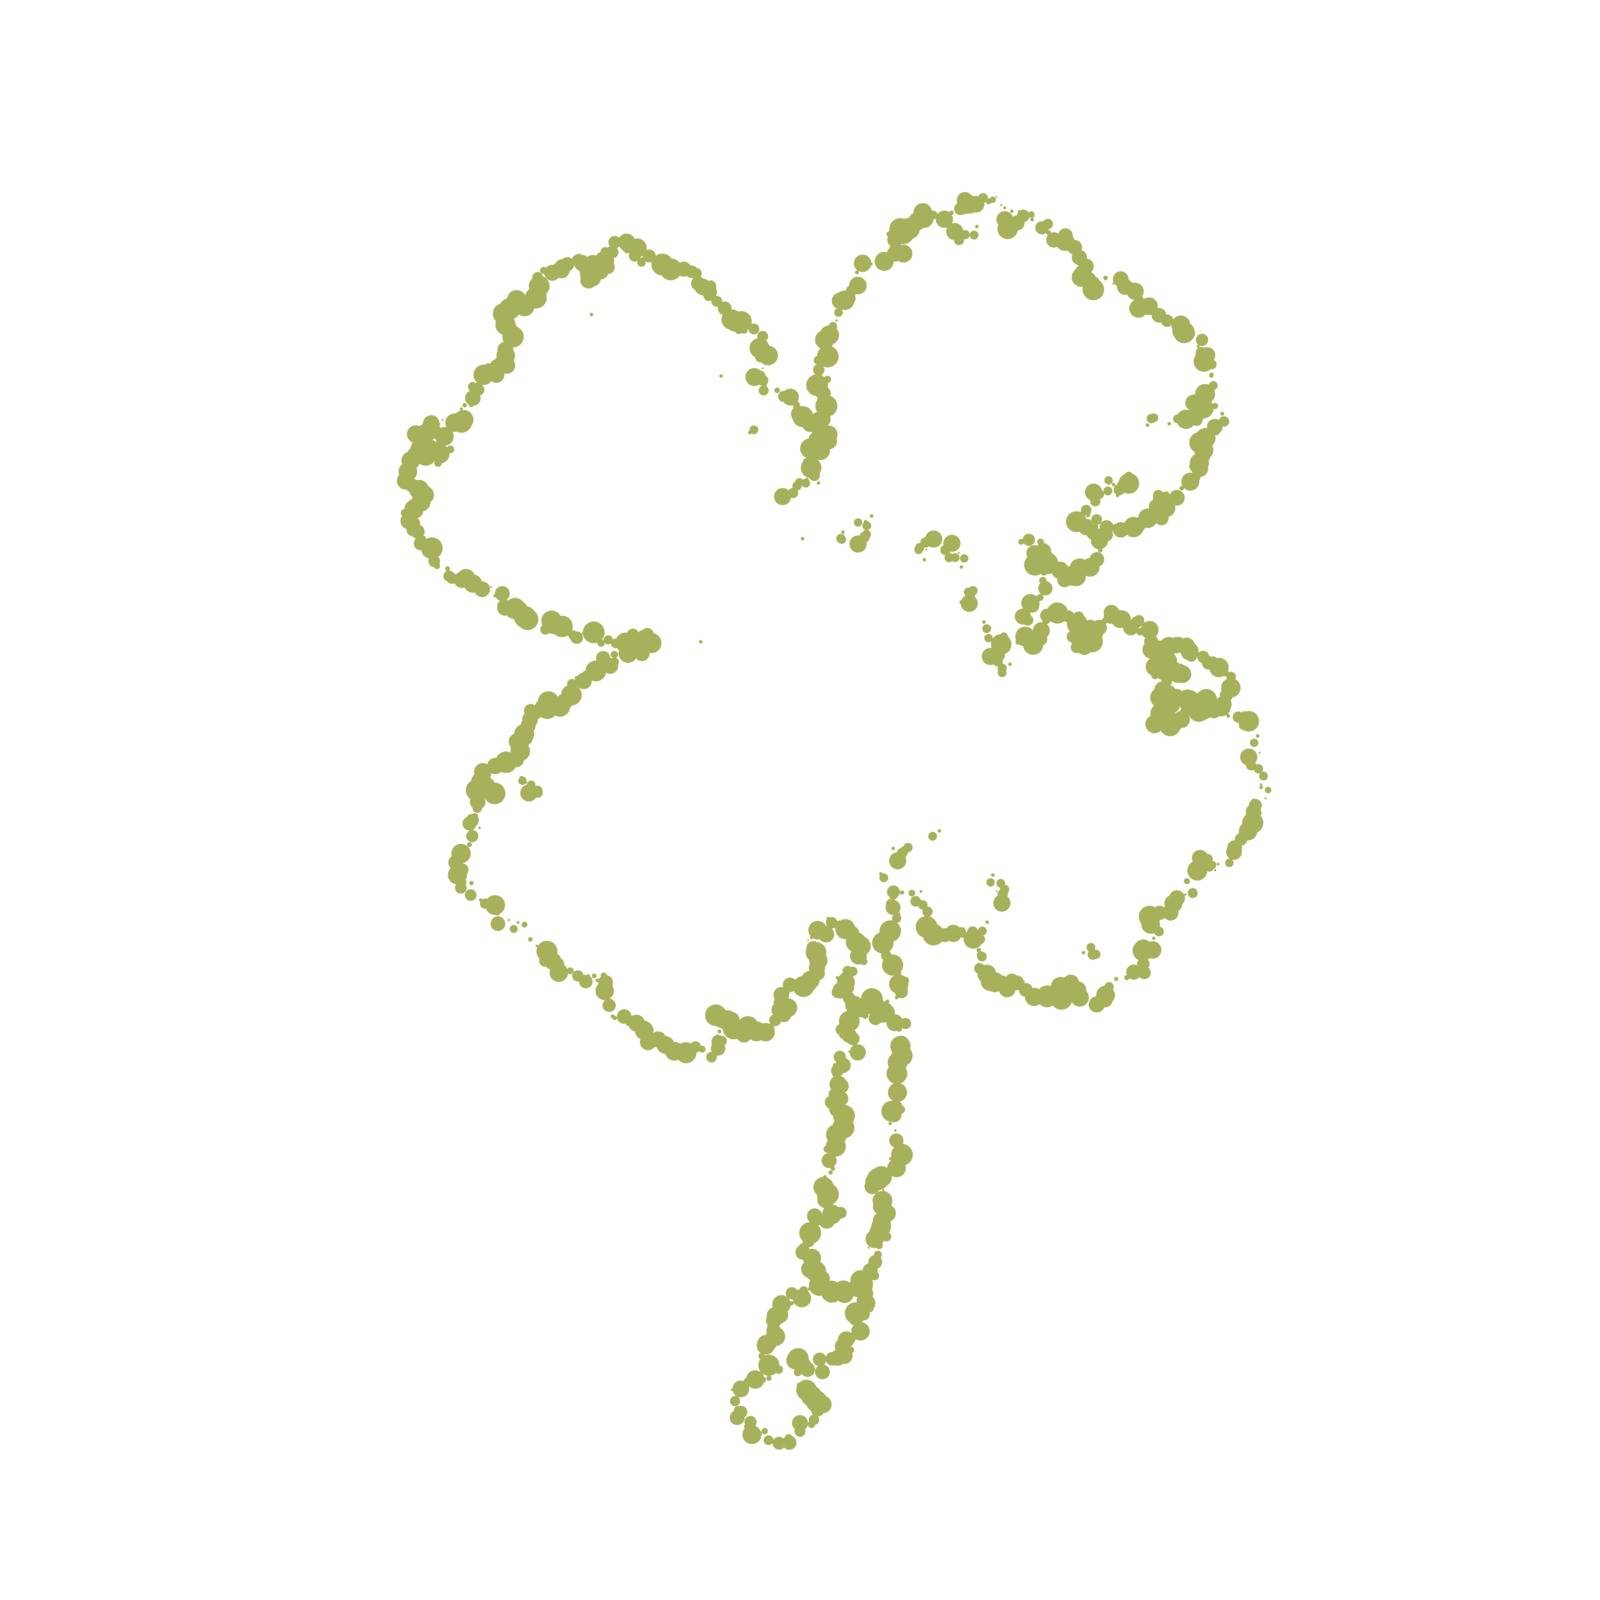 Grunge clover shamrock leaf contour isolated on a white background. Artistic distressed patrick day distress border element for your design. EPS10 vector